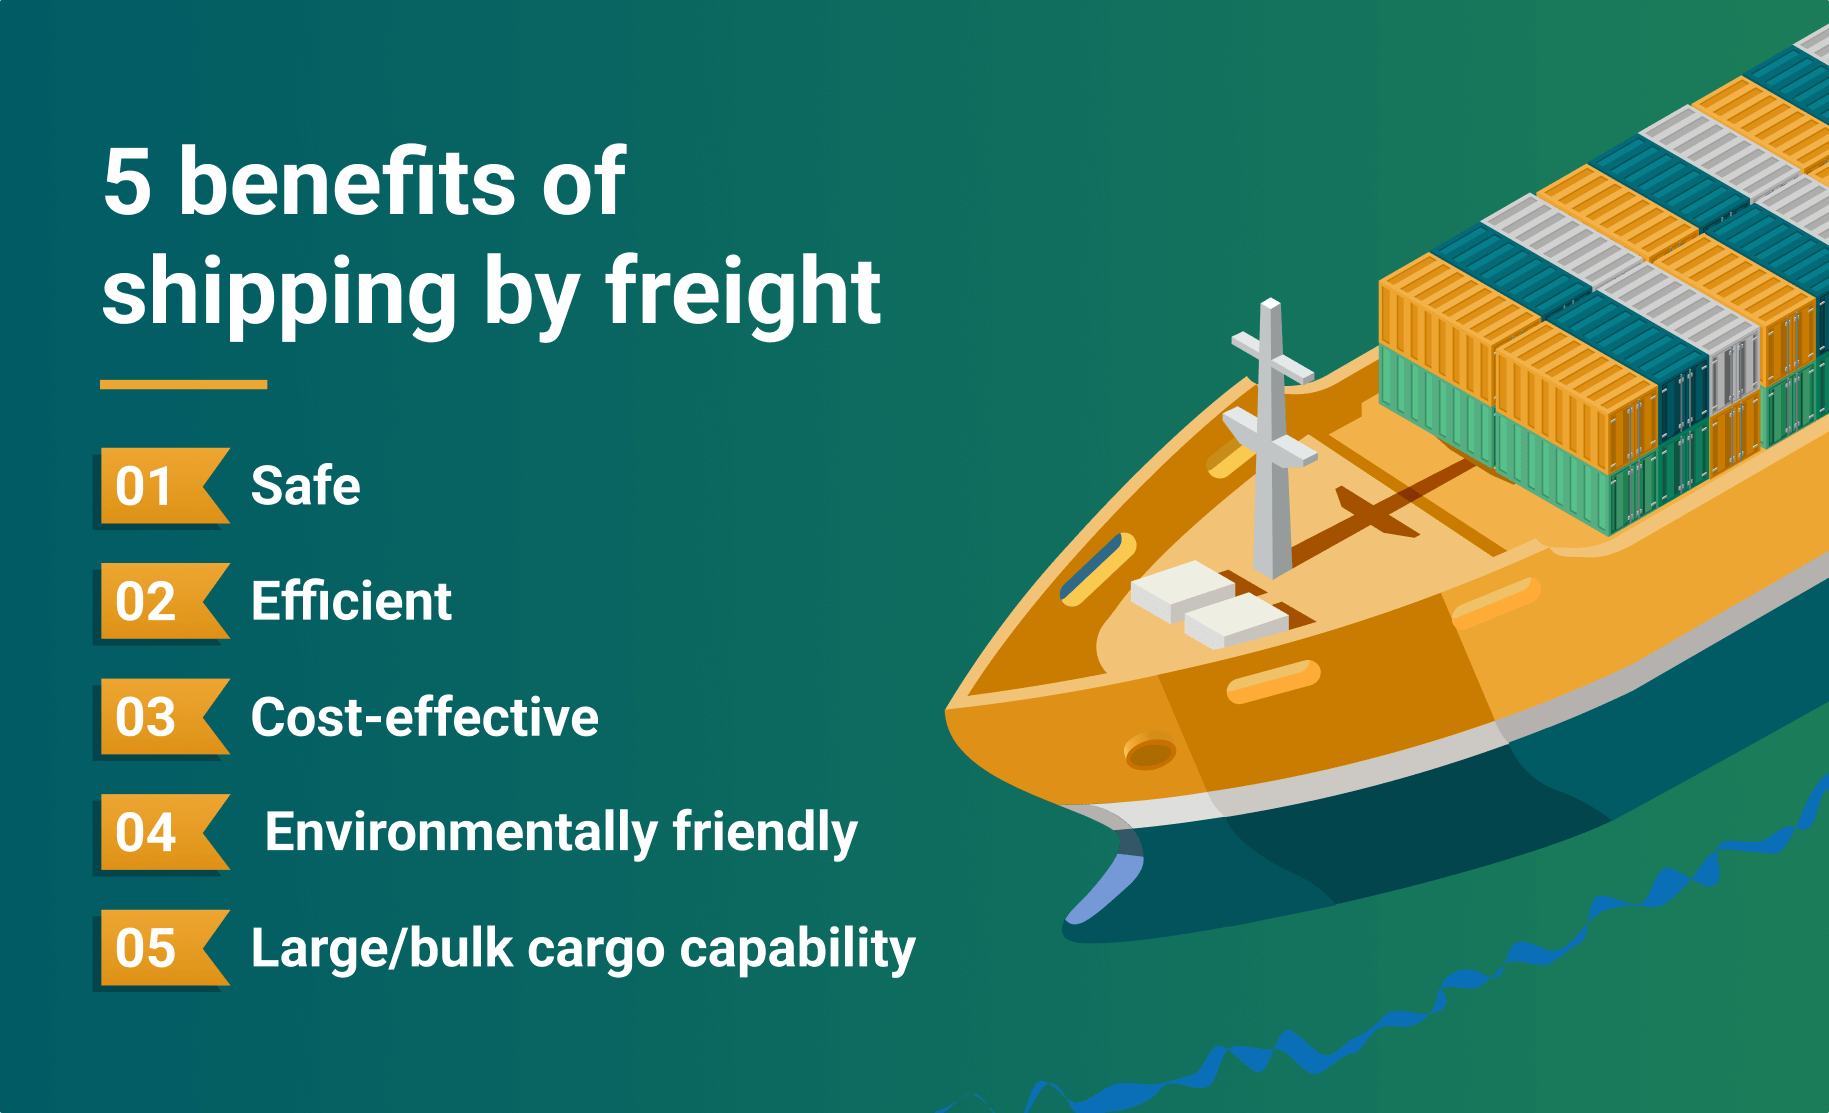 Find out what shipping by freight means [+ get benefits & cost]